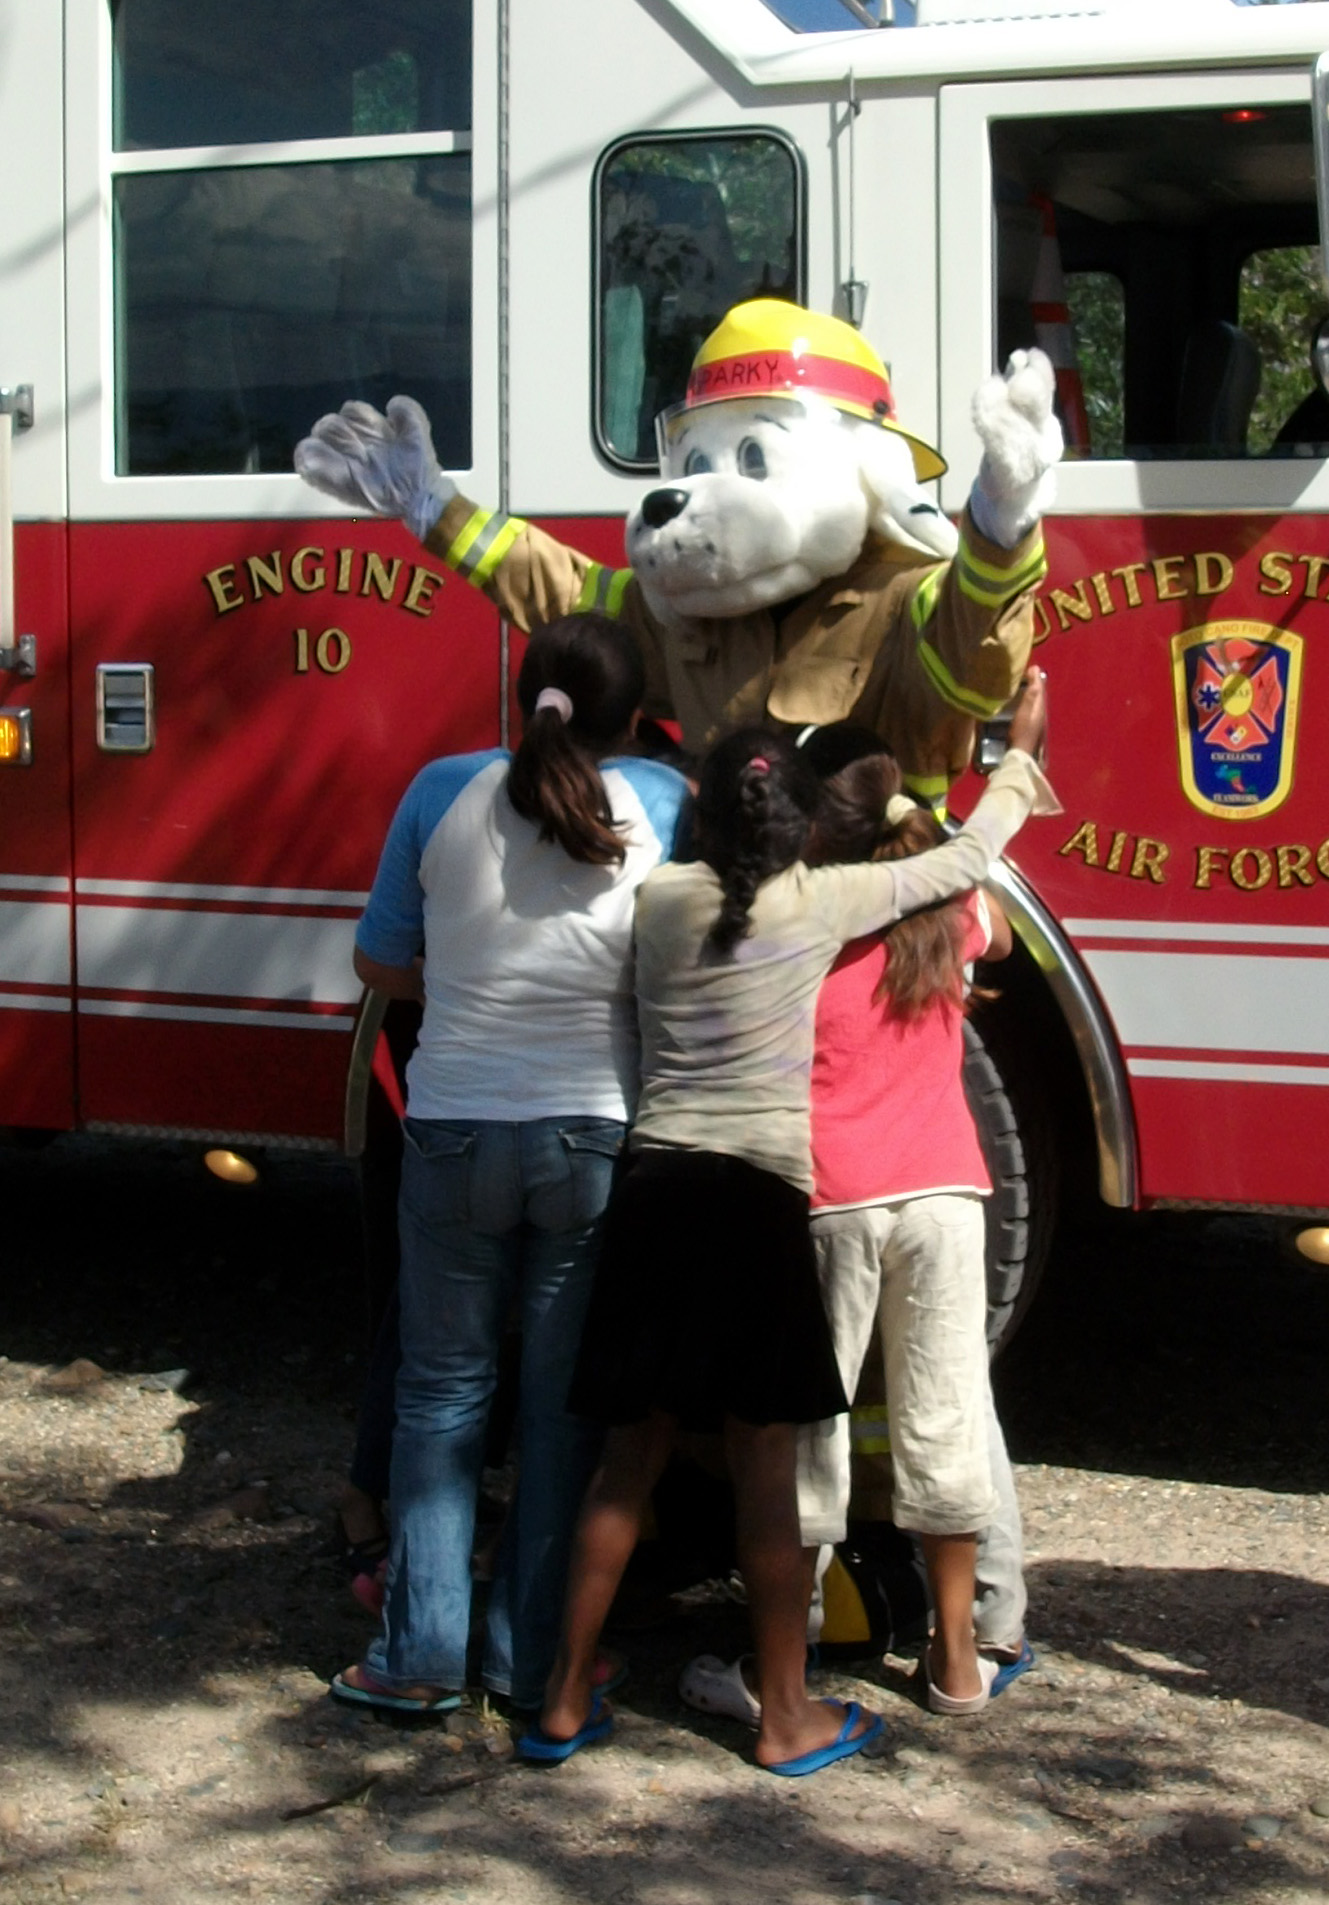 Sparky being hugged by children in front of a fire engine